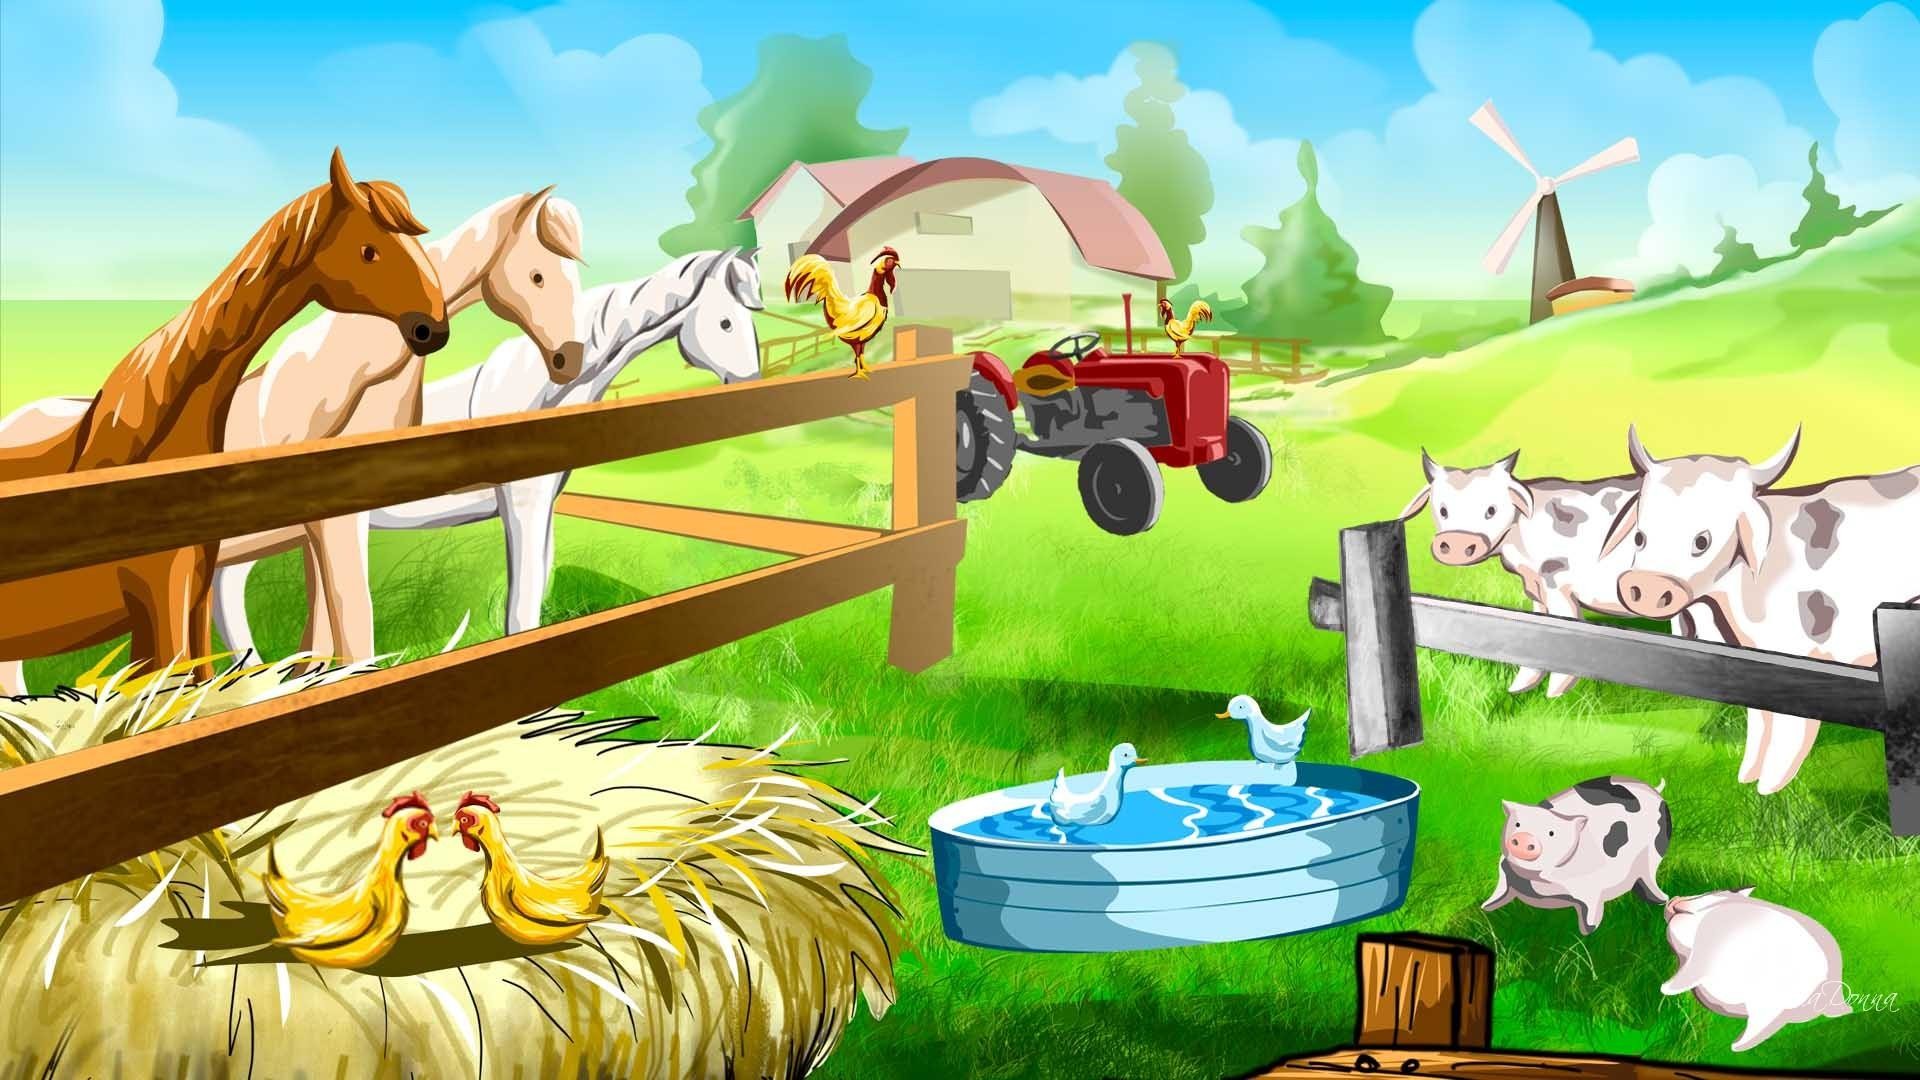 Photo Wallpaper - Farm Background With Animals - HD Wallpaper 